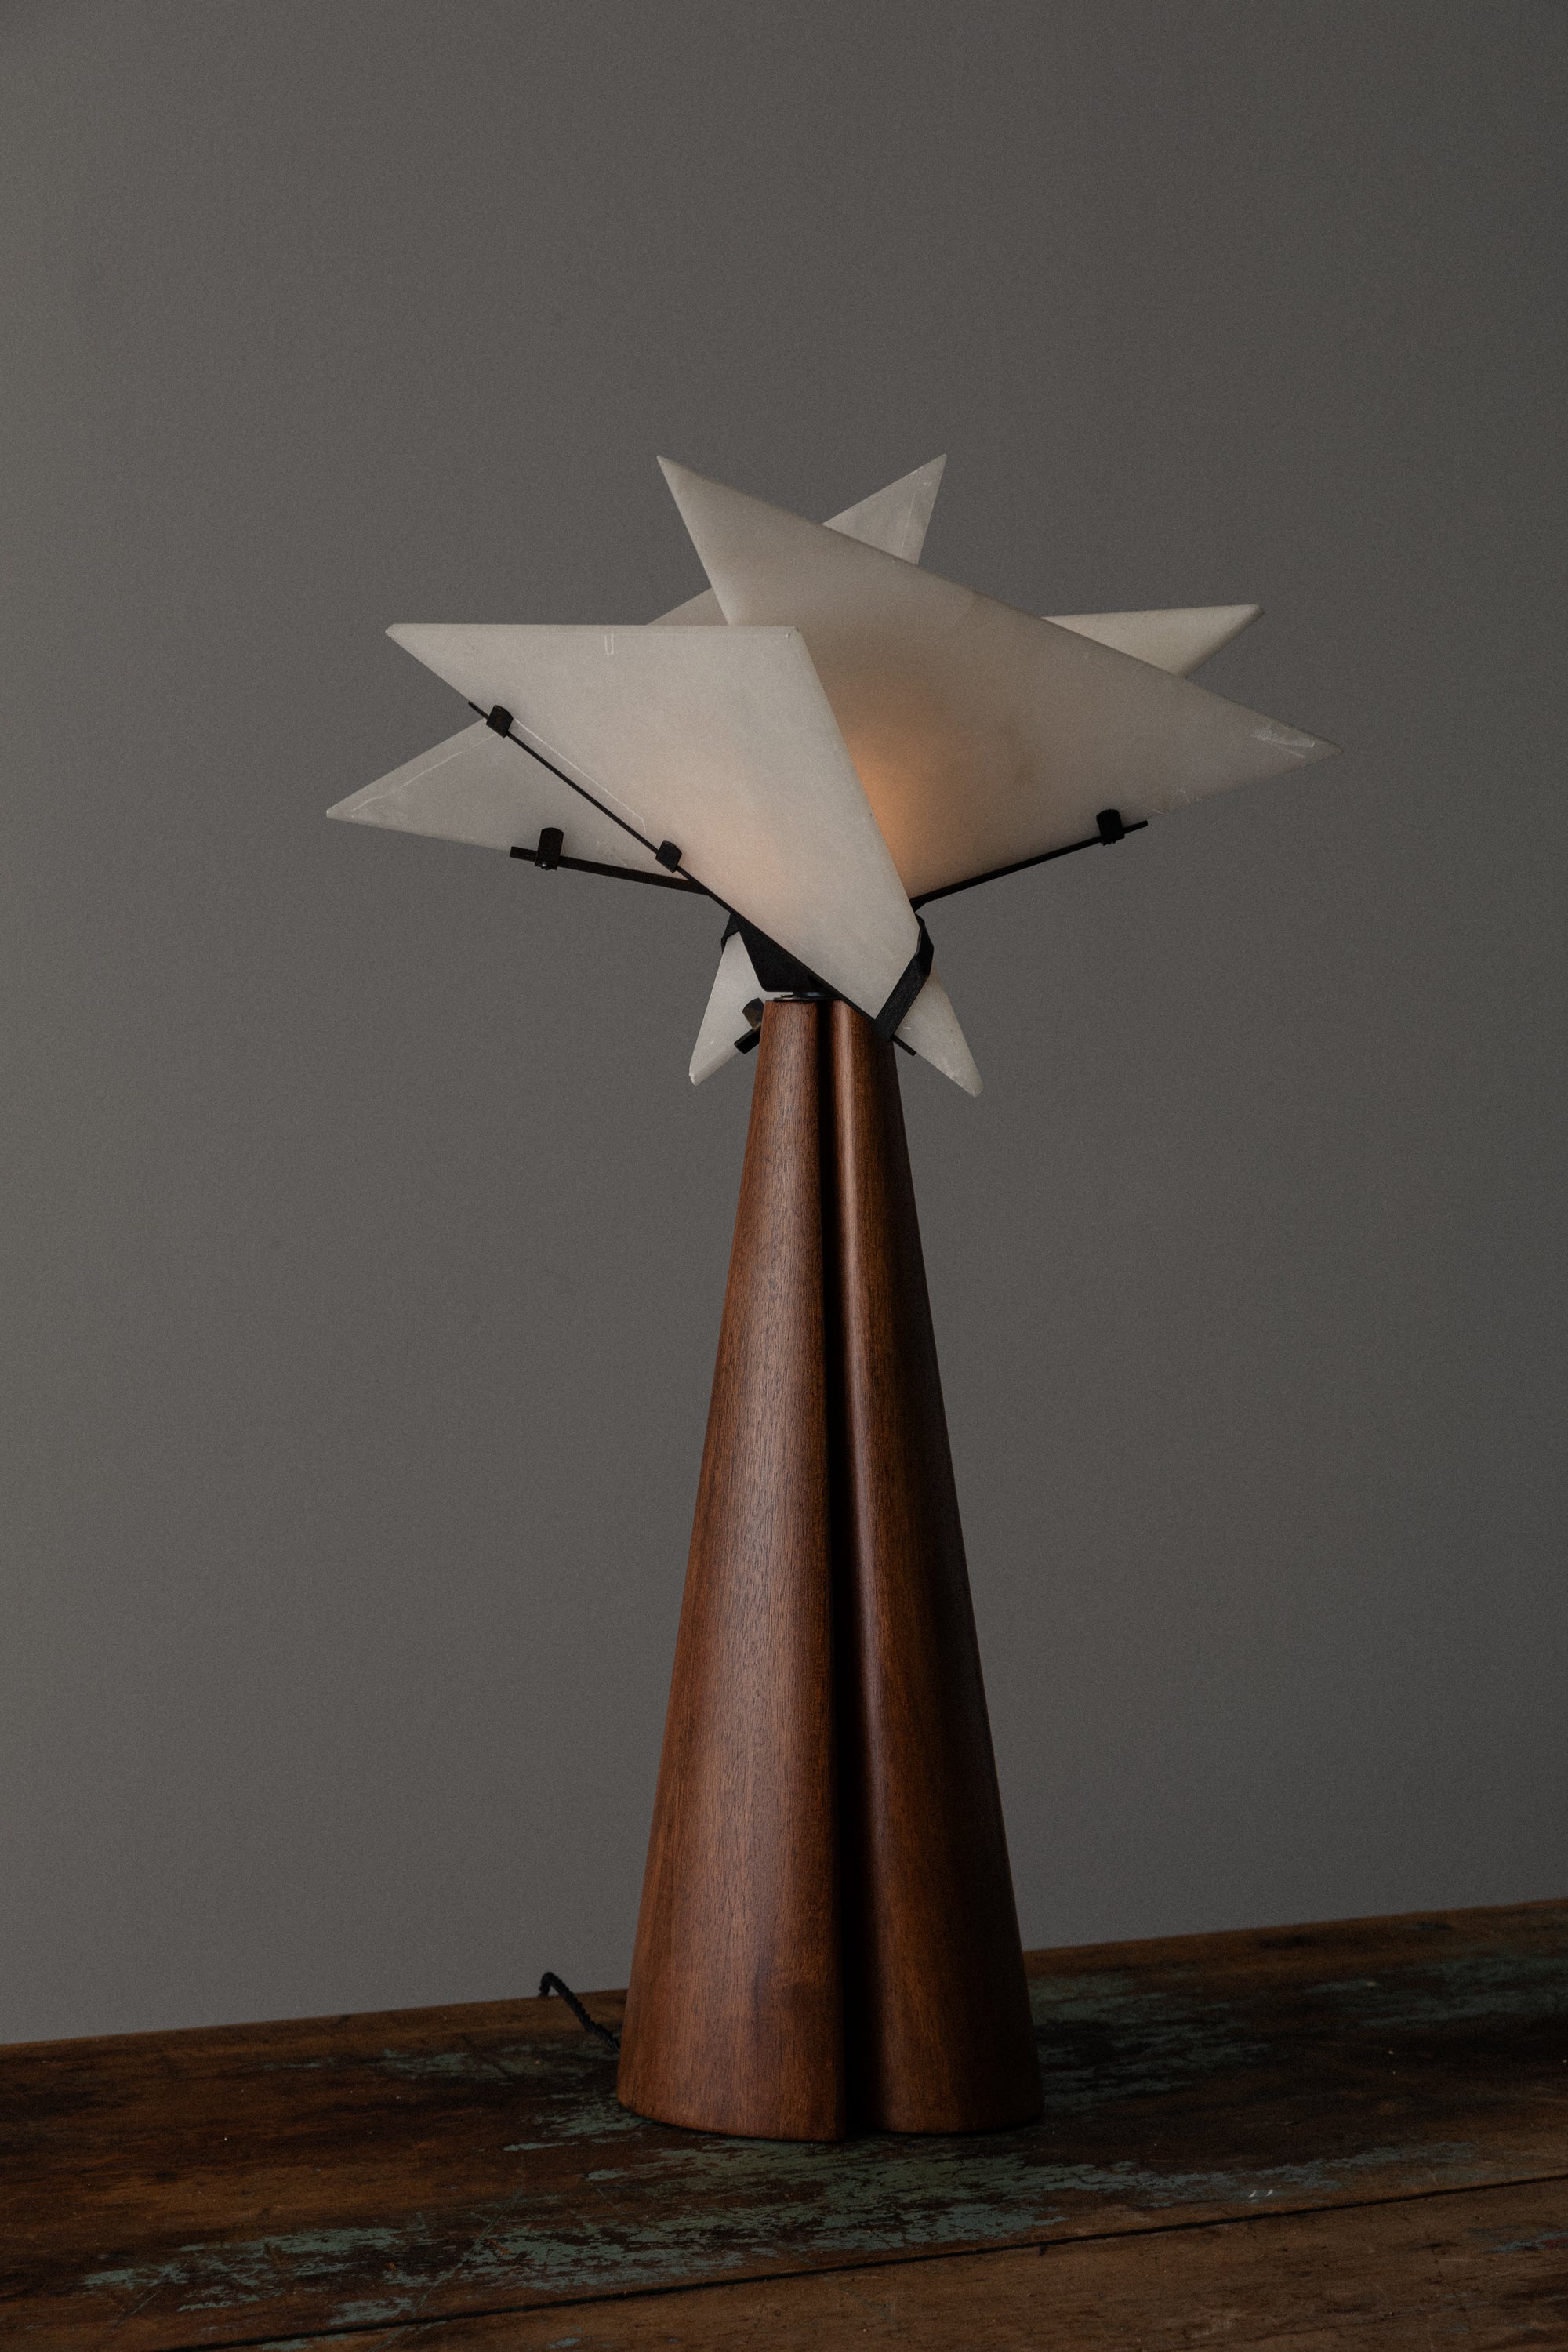 "Lampe Religieuse" by Pierre Chareau